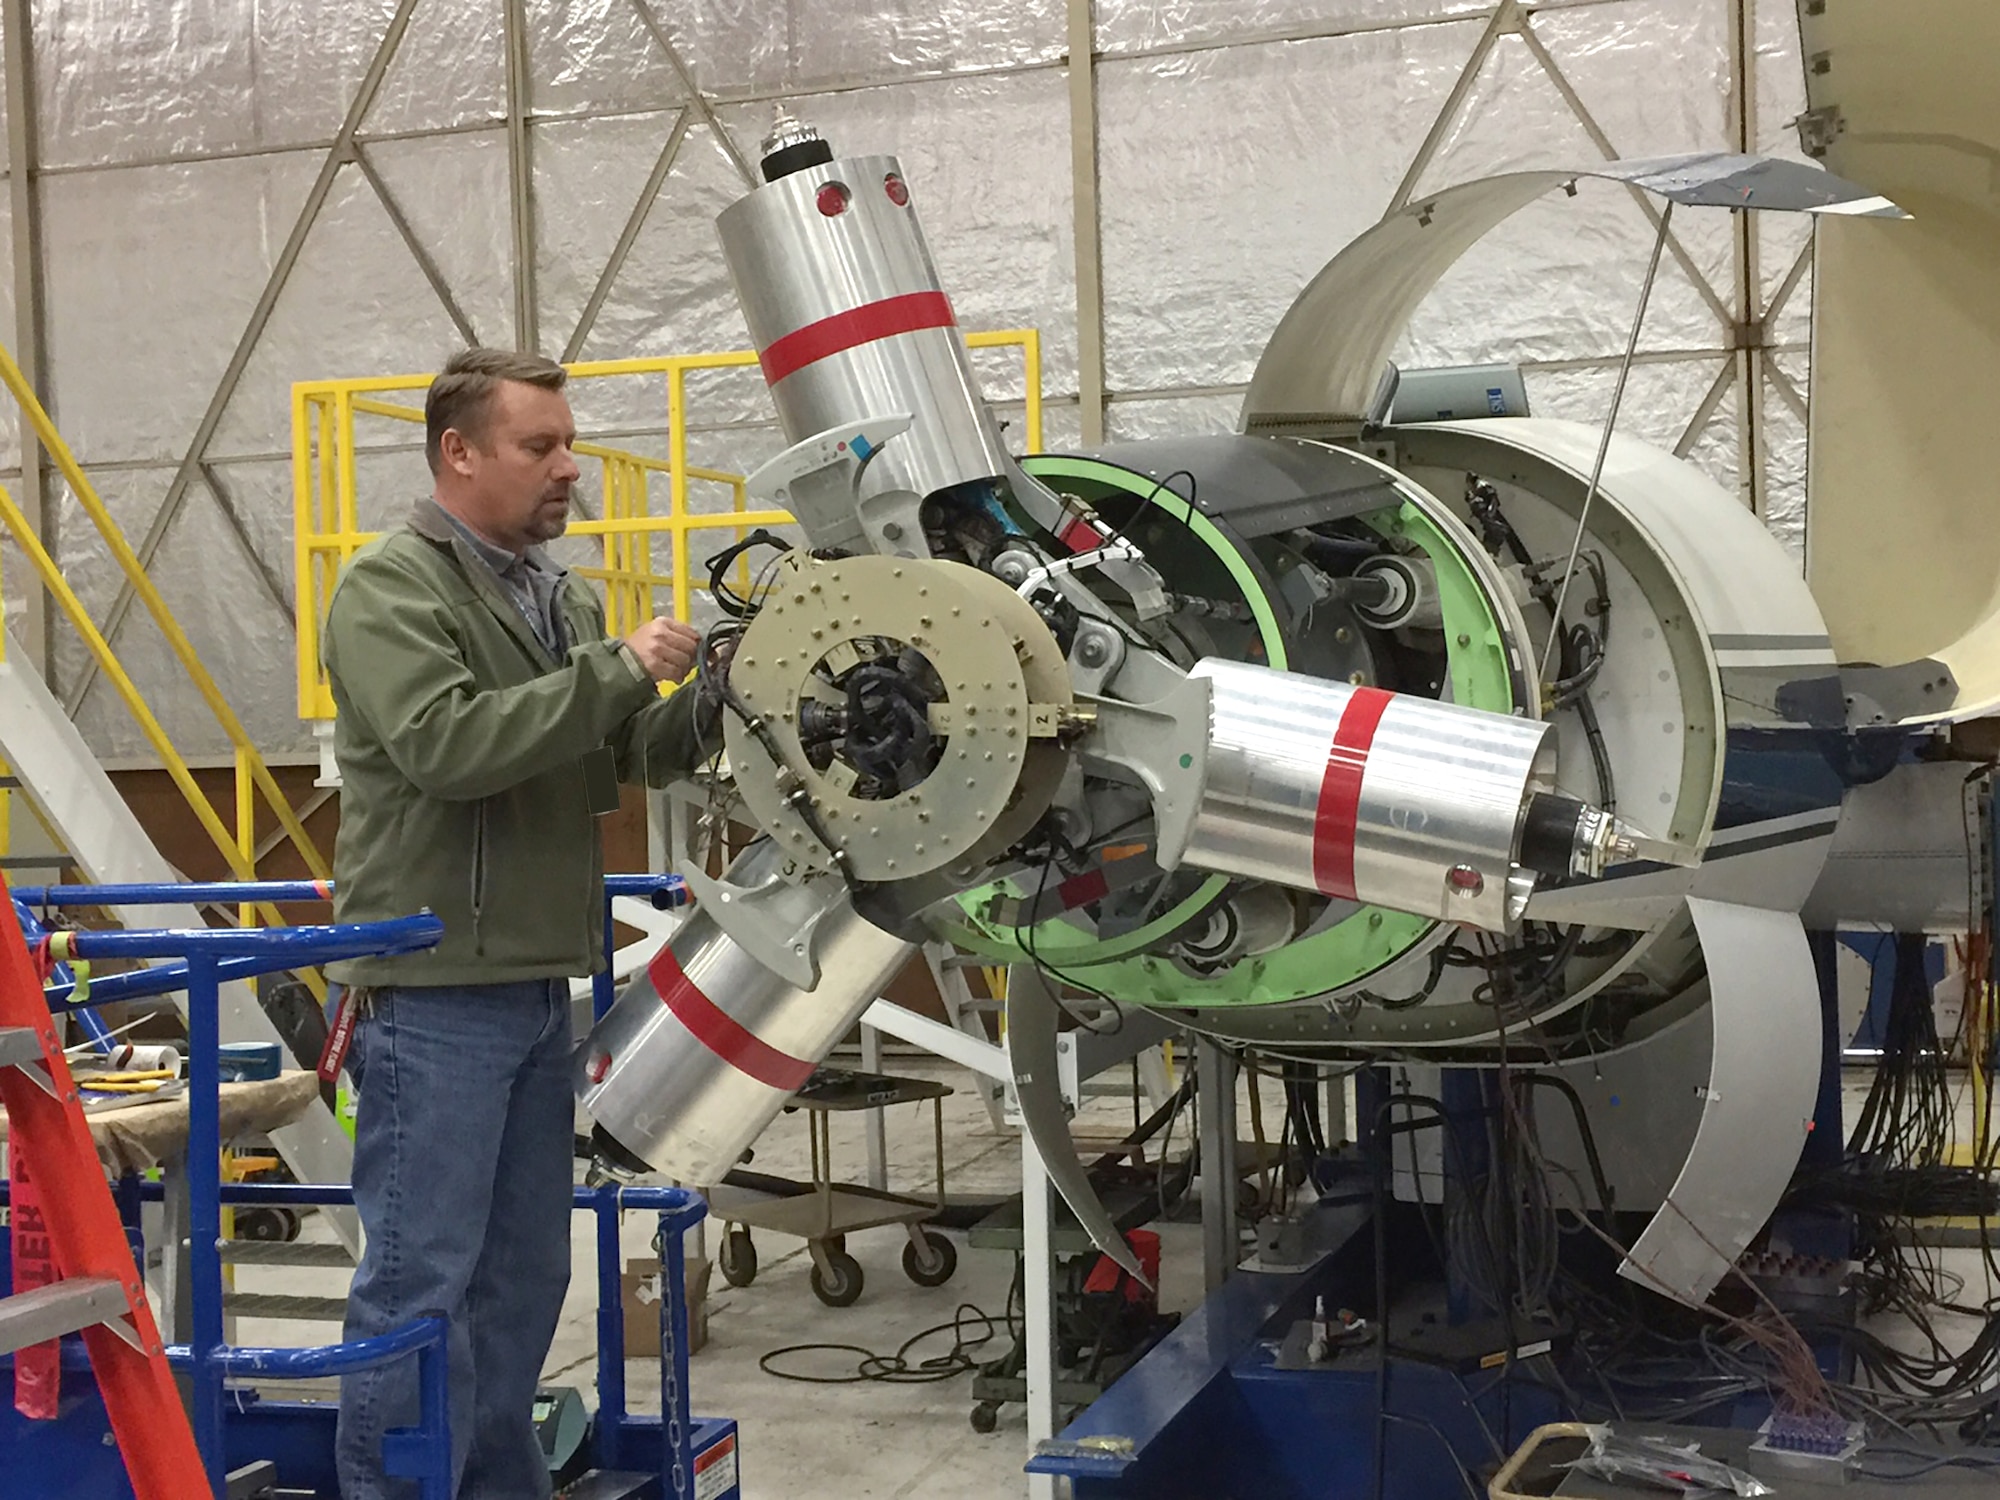 AEDC instrumentation engineer Dan Pruyn works on the Tiltrotor Test Rig in preparation for a test in the 40-foot by-80-foot wind tunnel at the National Full-Scale Aerodynamics Complex, the AEDC wind tunnel testing site located in California. The test of the TTR is a project sponsored by the National Aeronautics and Space Administration. TTR is a horizontal axis rig and rotates on the test section turntable to face the rotor into the wind at high speed, or fly edge-wise at low speed (100 knots), or at any angle in between. It is designed to accommodate a variety of rotors. (U.S. Air Force photo/Jeffrey Johnson)